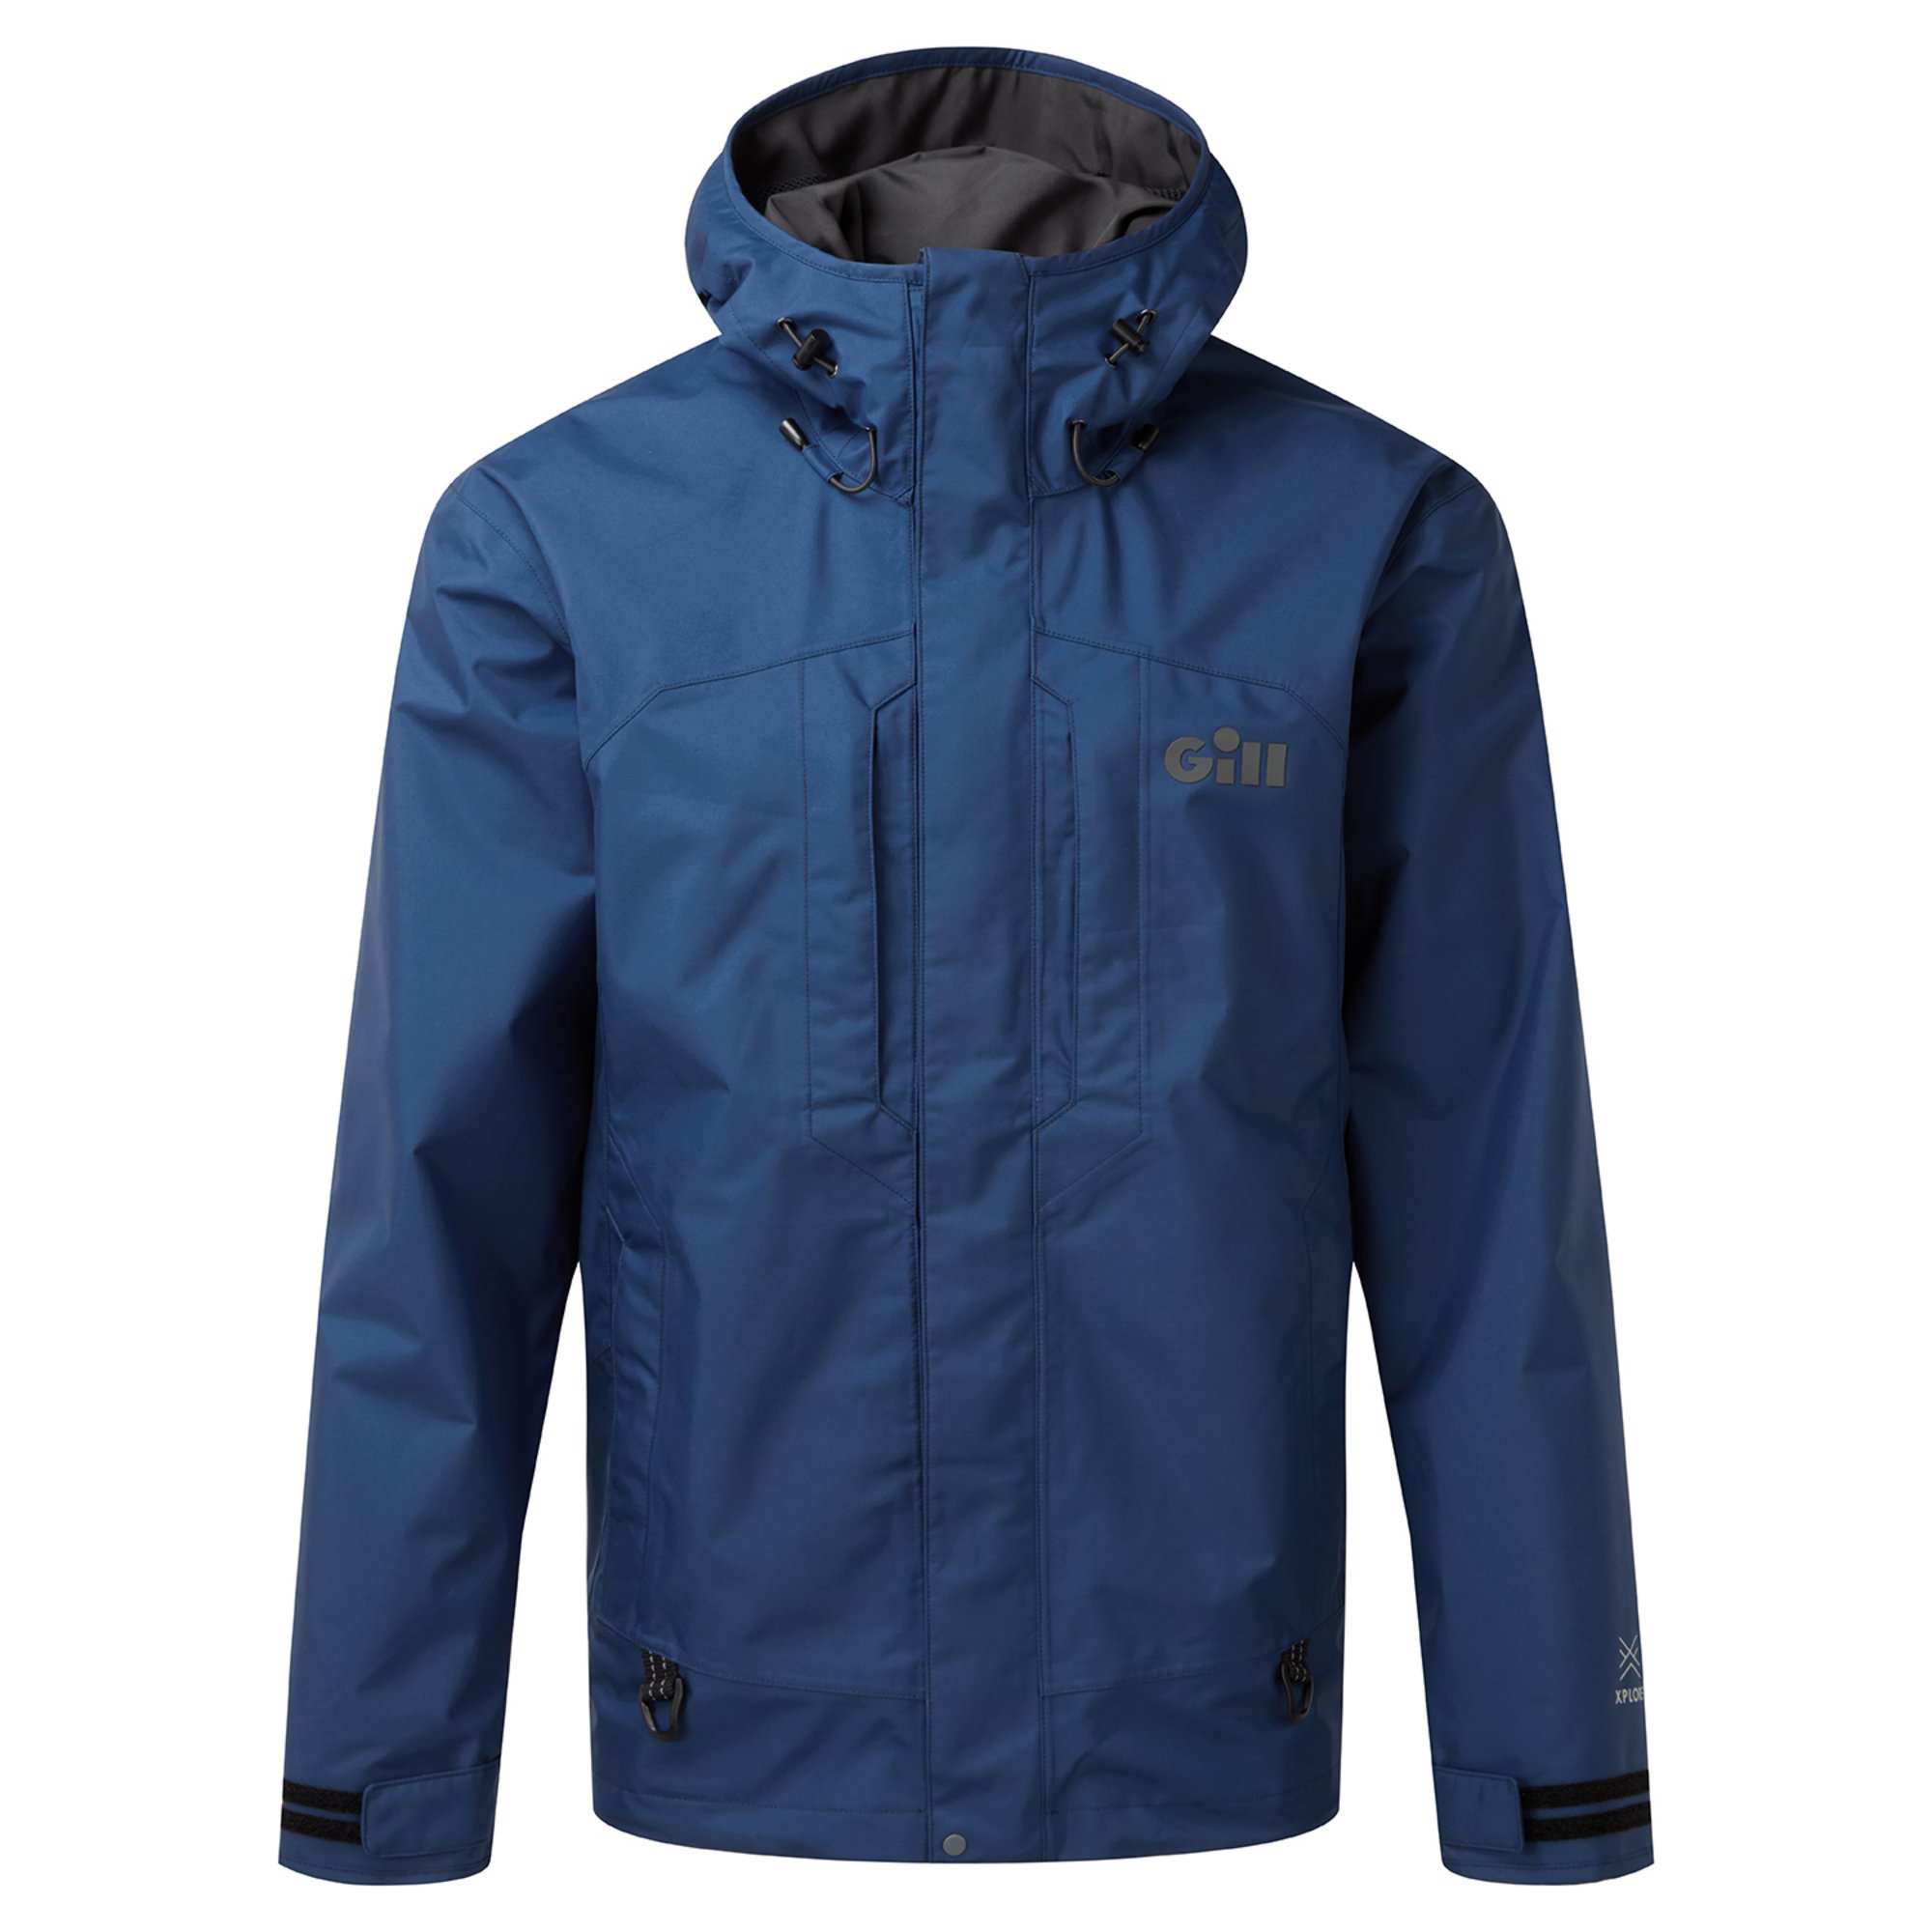 FG301J Aspect Fishing Store Jacket: US Apparel Fishing Gill - Technical Official